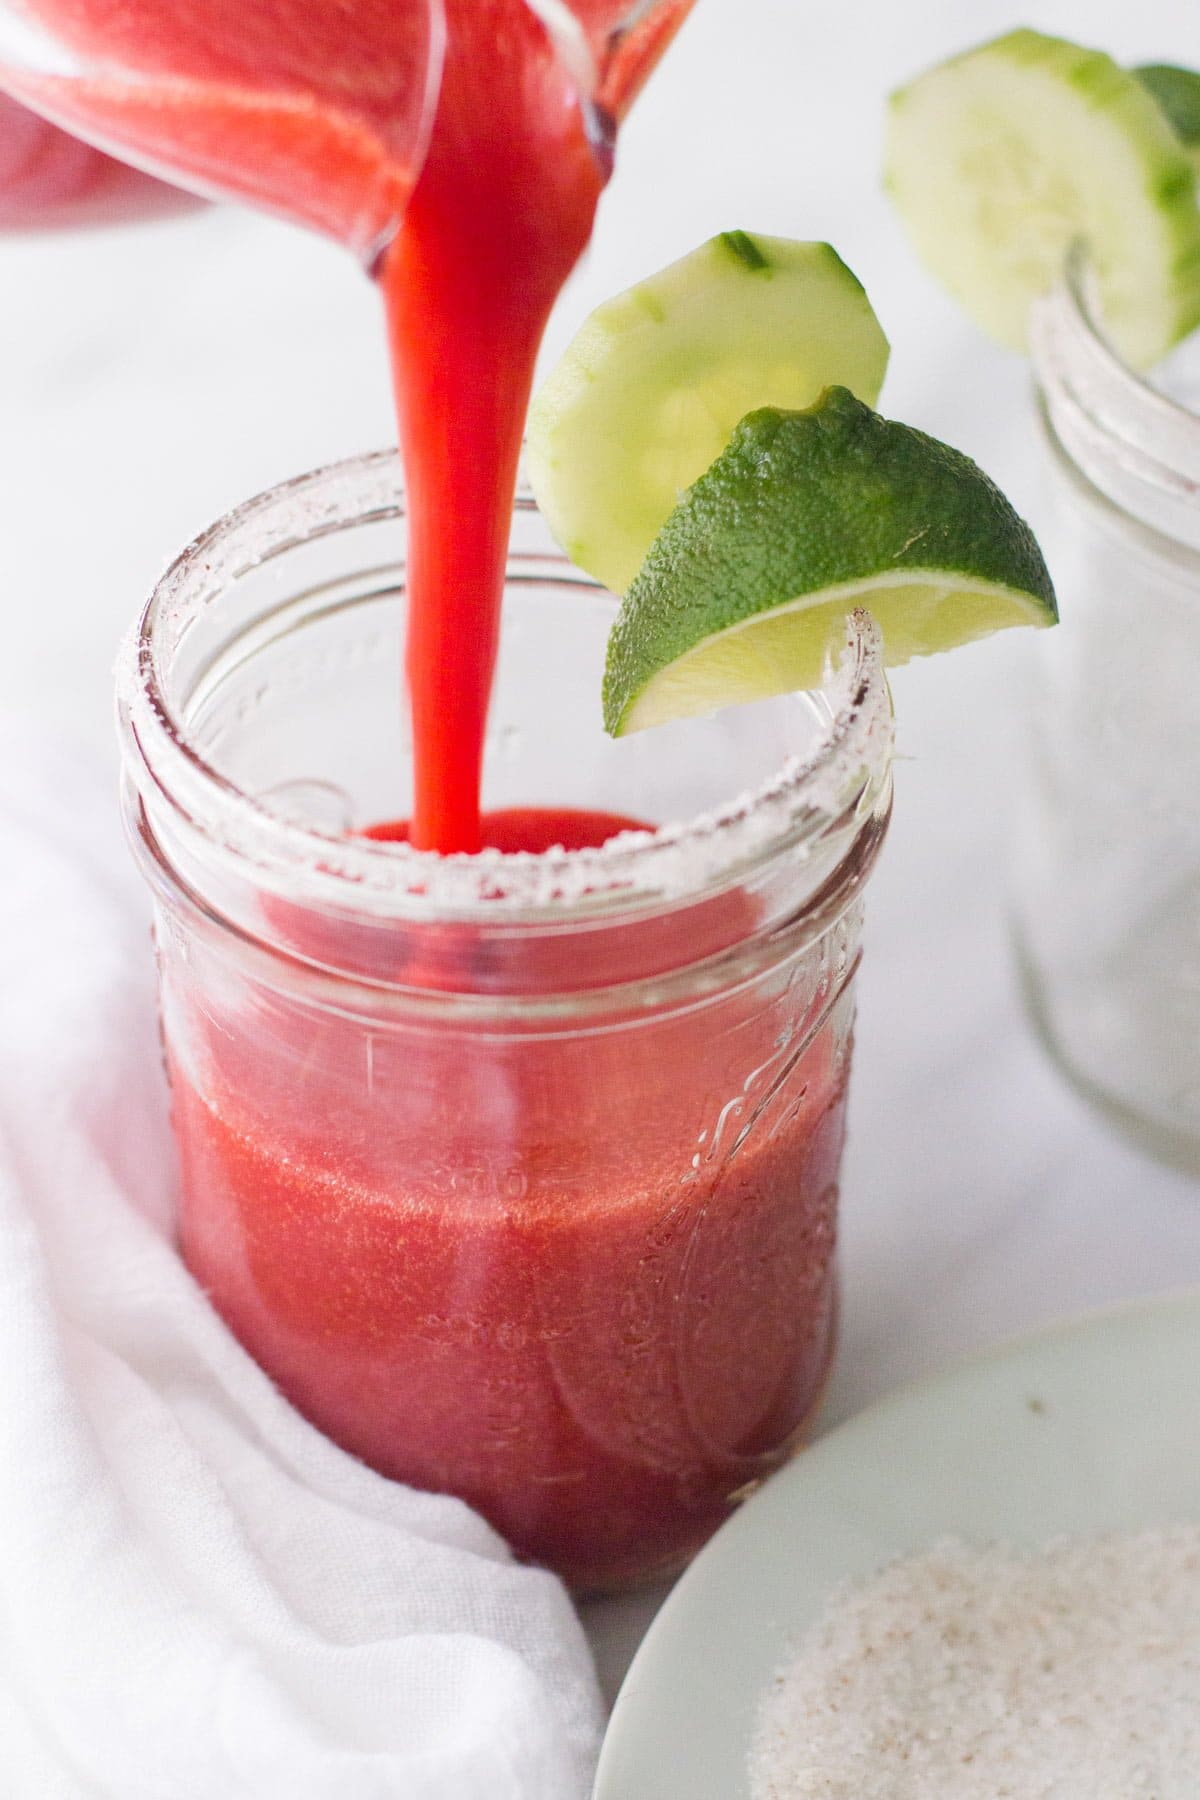 Strawberry margarita pours into a salt-rimmed jar garnished with a cucumber slice and lime wedge.